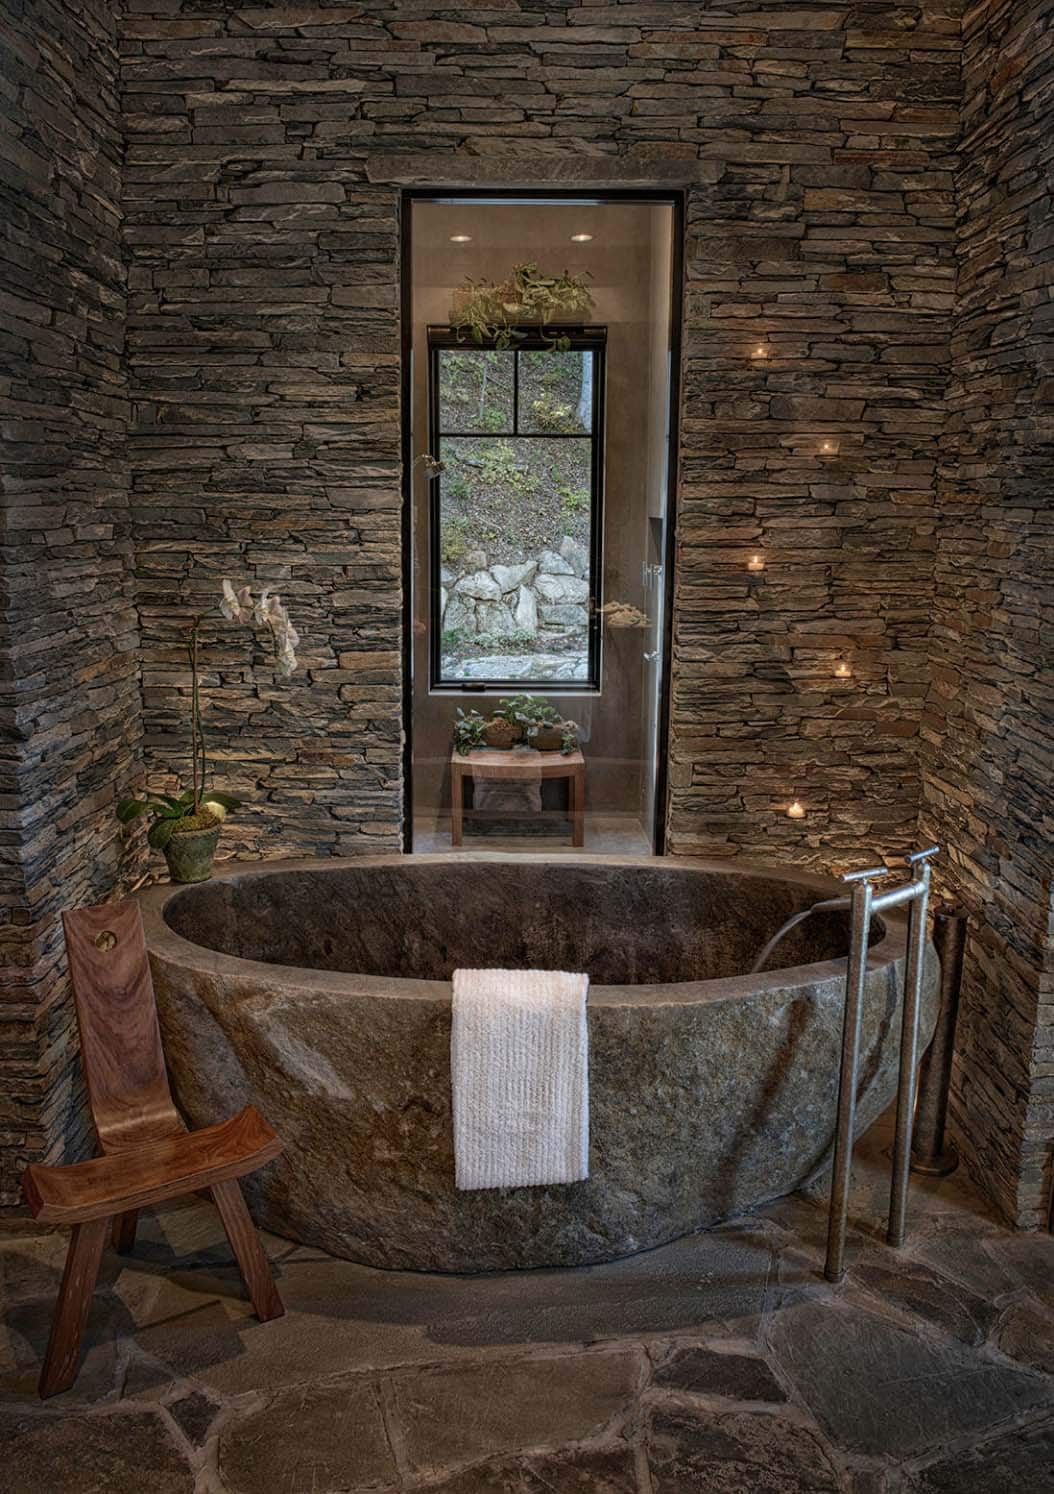 romantic rustic bathroom with stone tub and stone walls